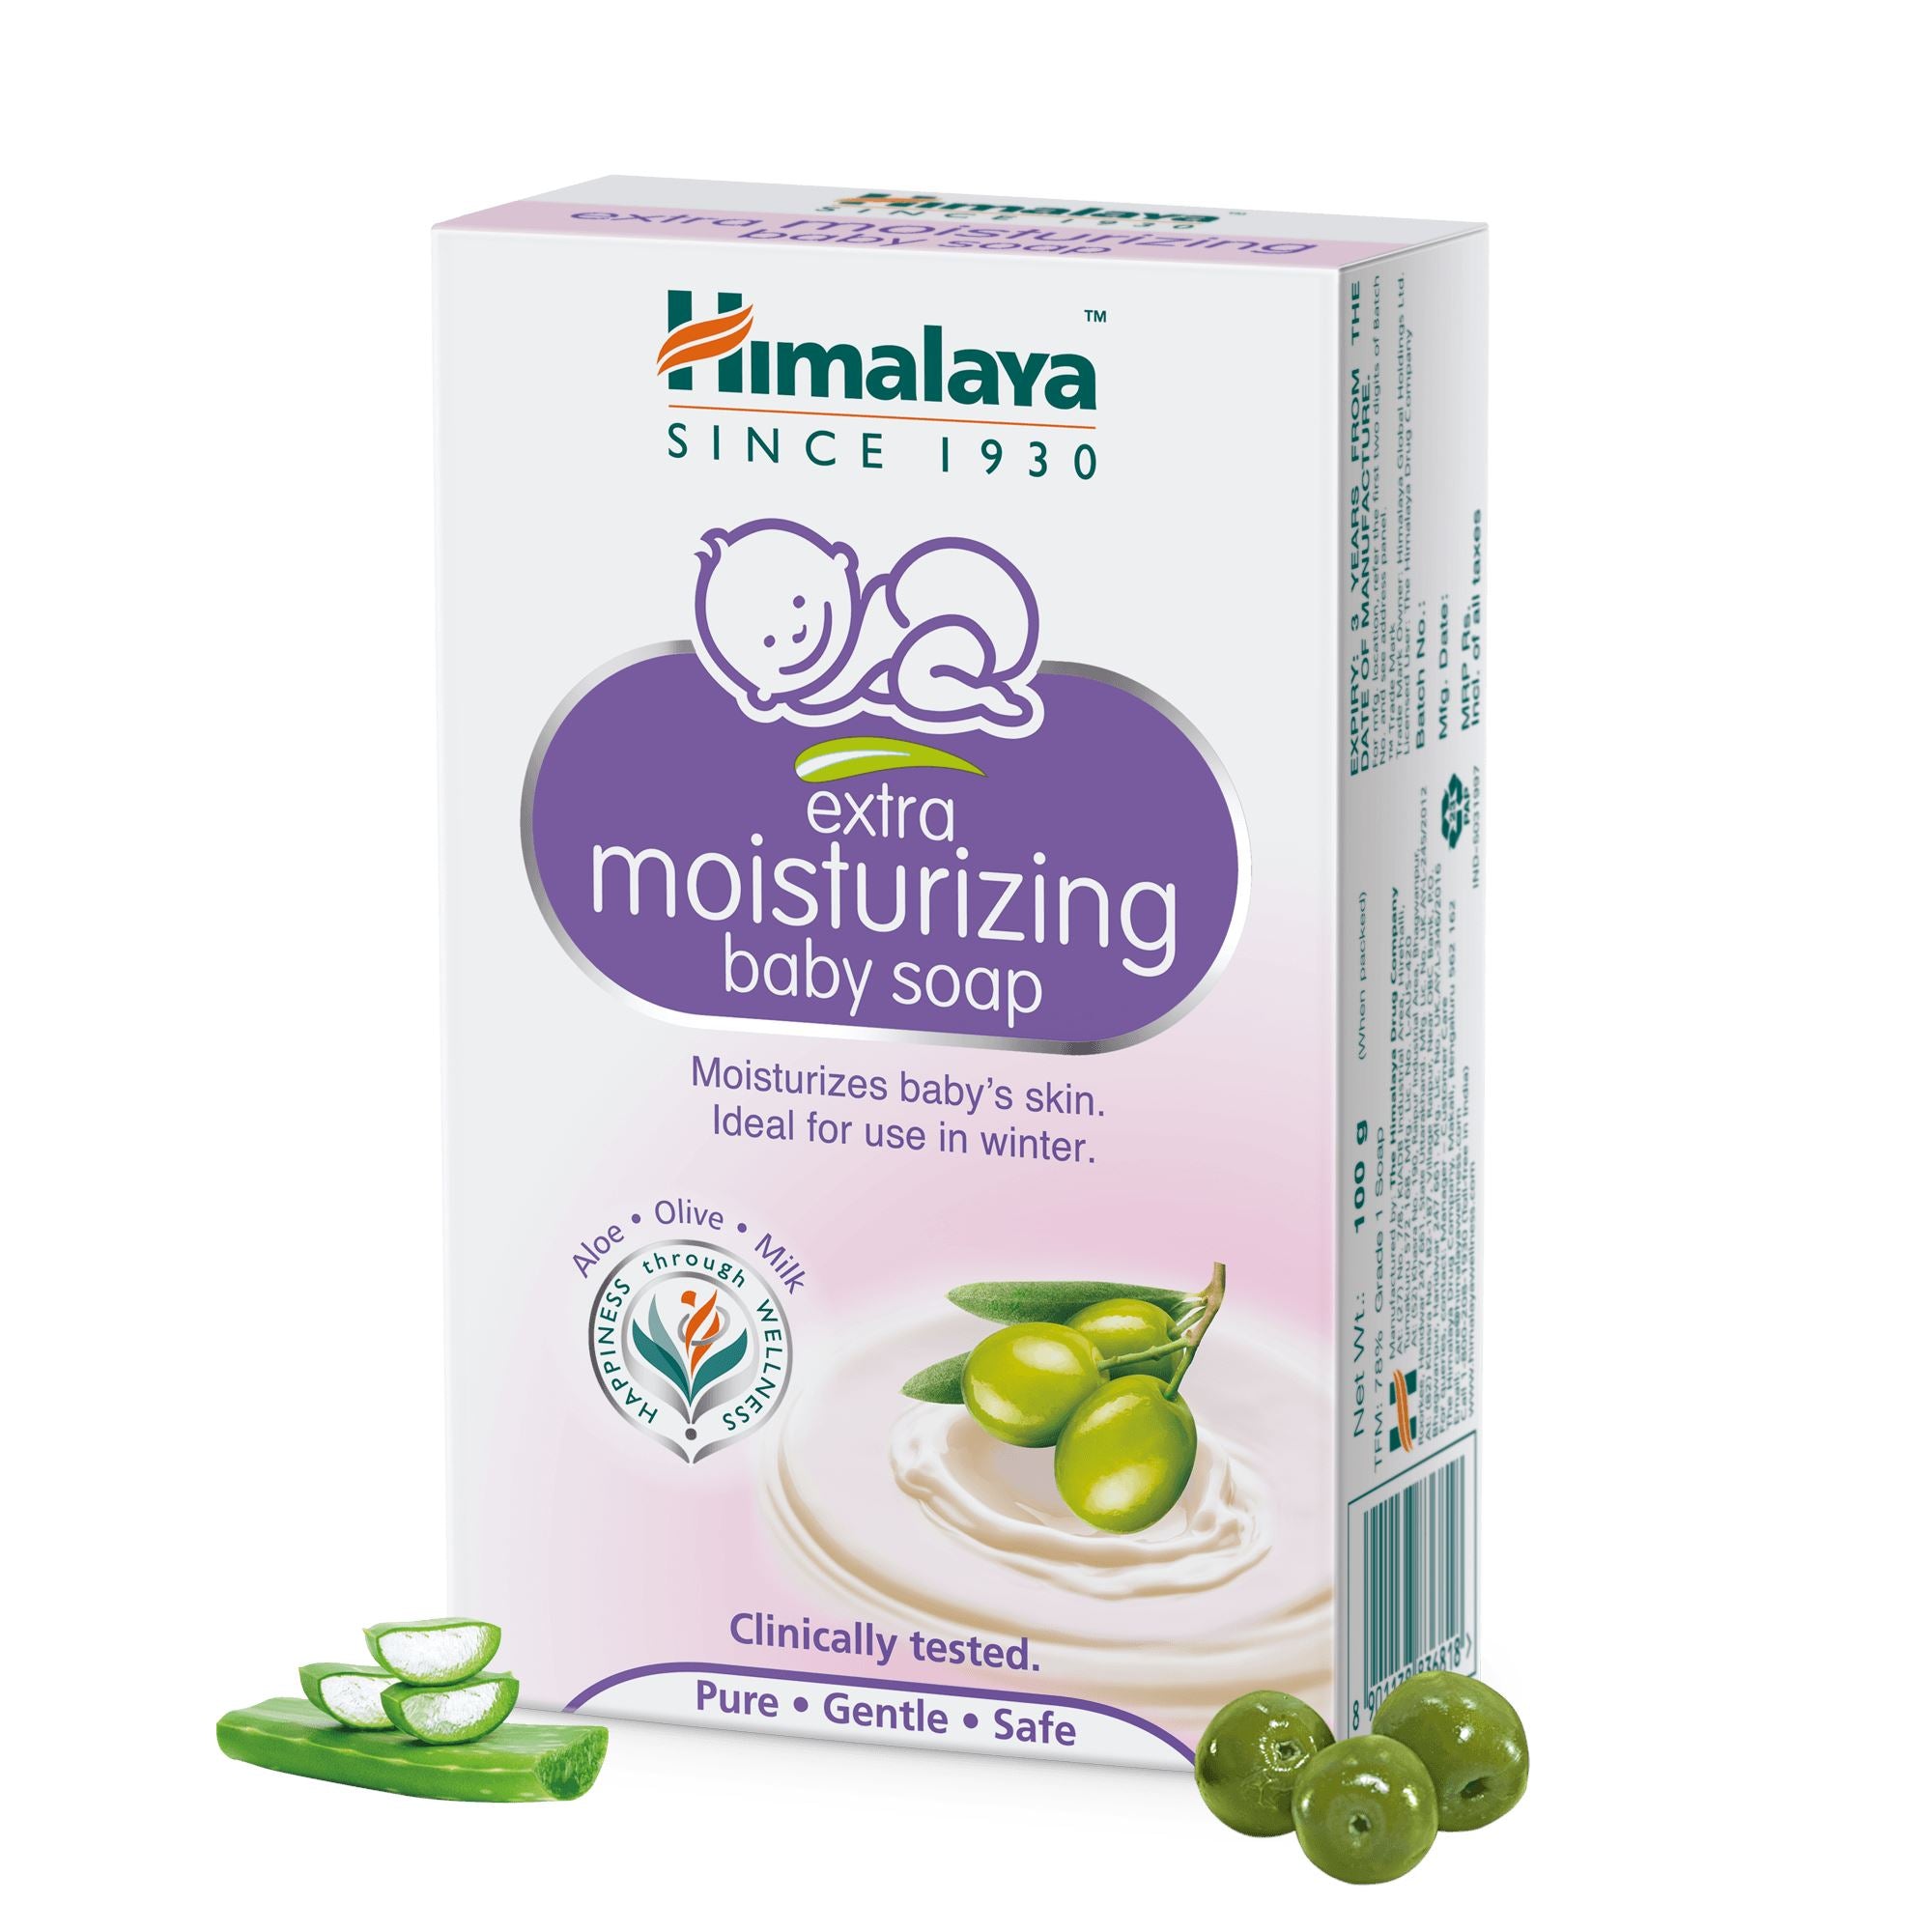 Himalaya extra moisturizing baby soap 100g - Gently cleanses without causing post-bath dryness